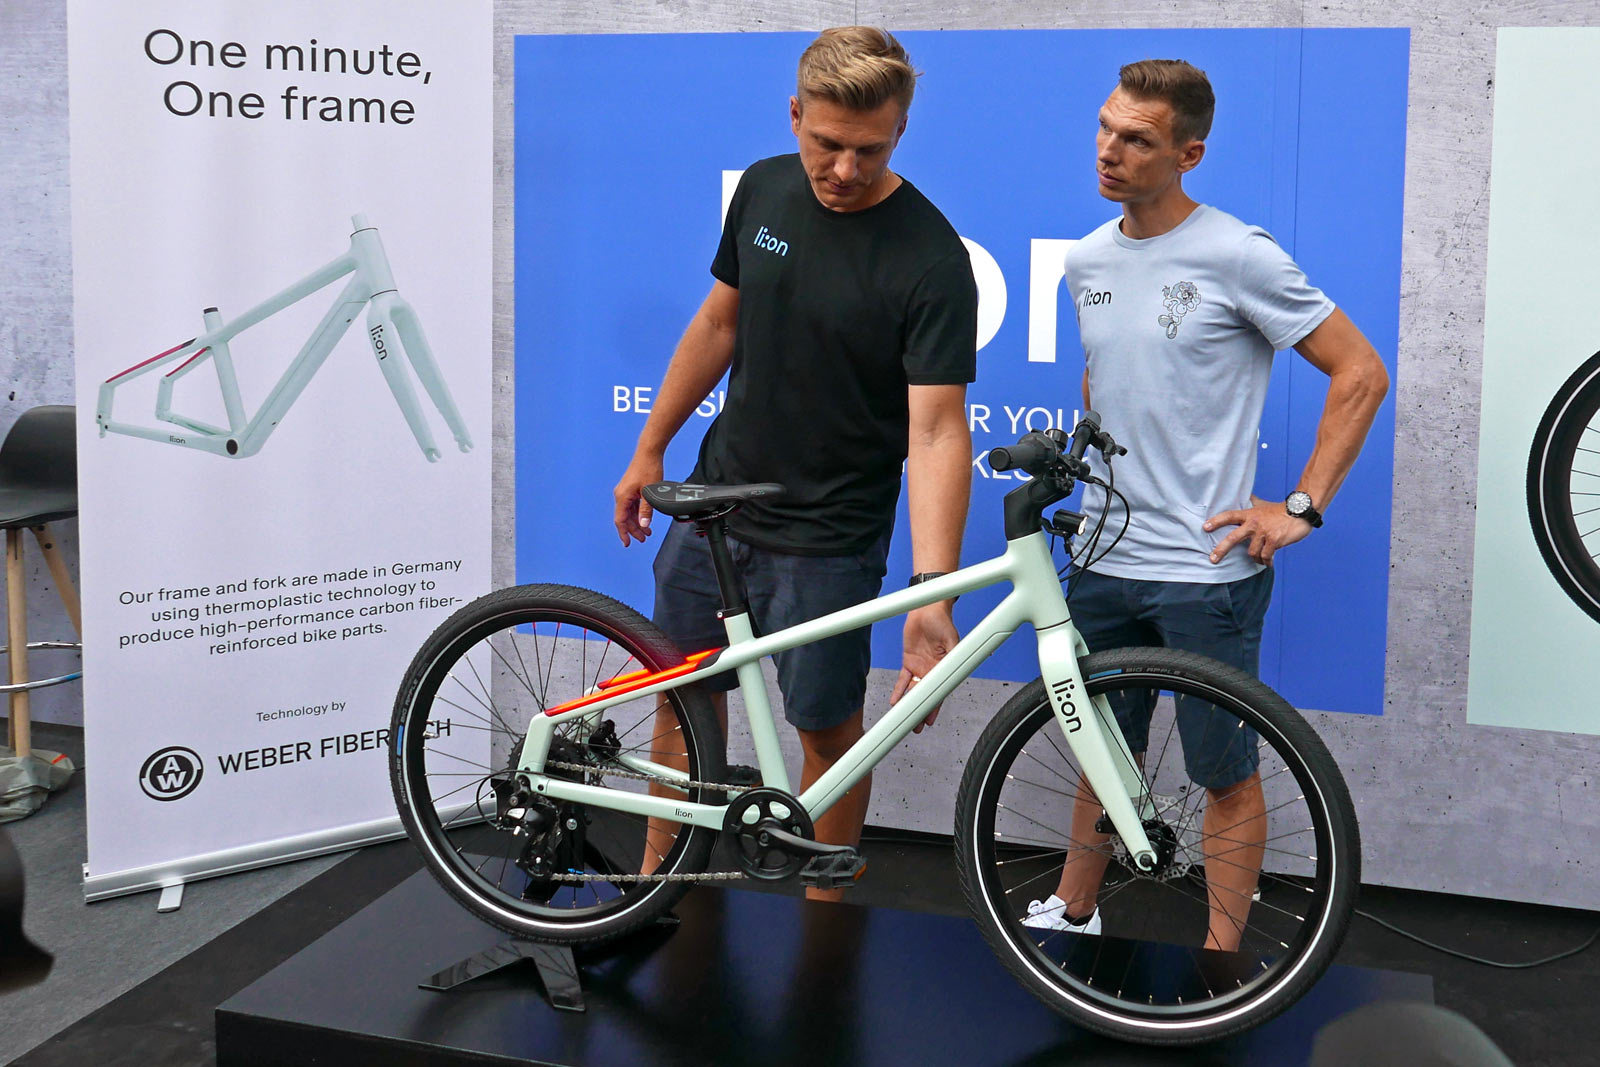 Eurobike 2023, the largest cycling industry trade show, li:on kids bikes presented by Marcel Kittel & Tony Martin